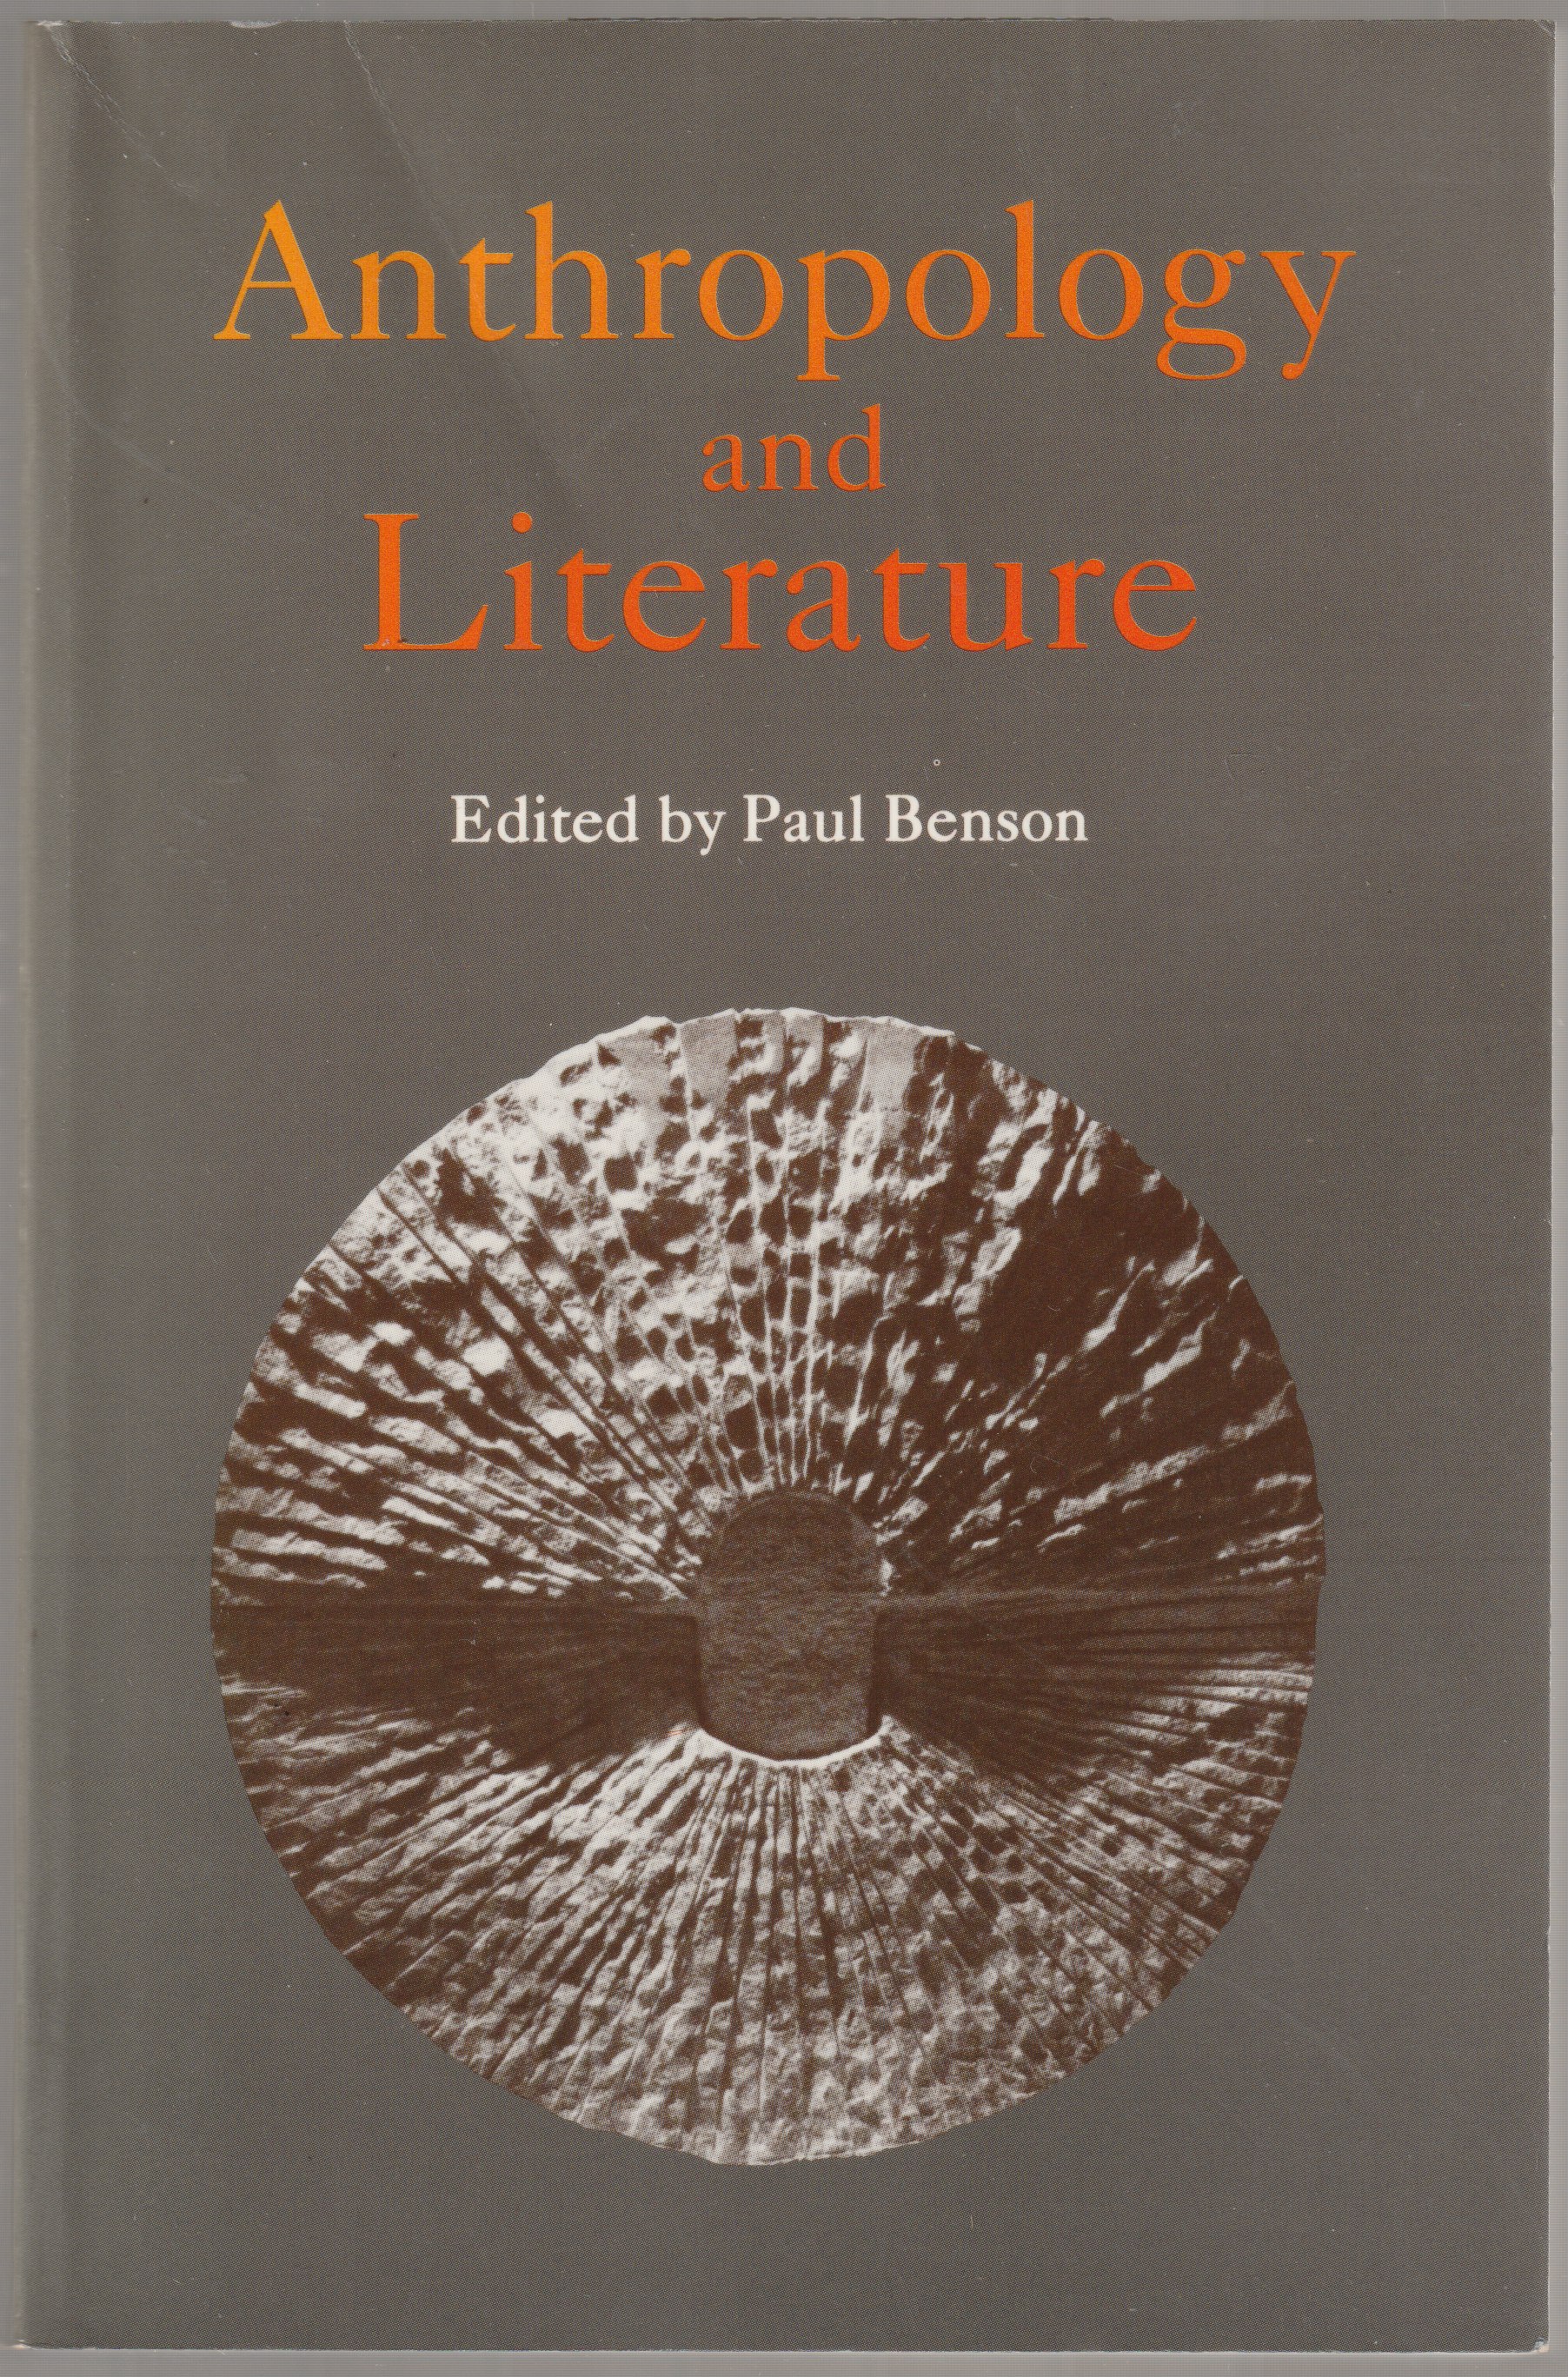 Anthropology and literature.